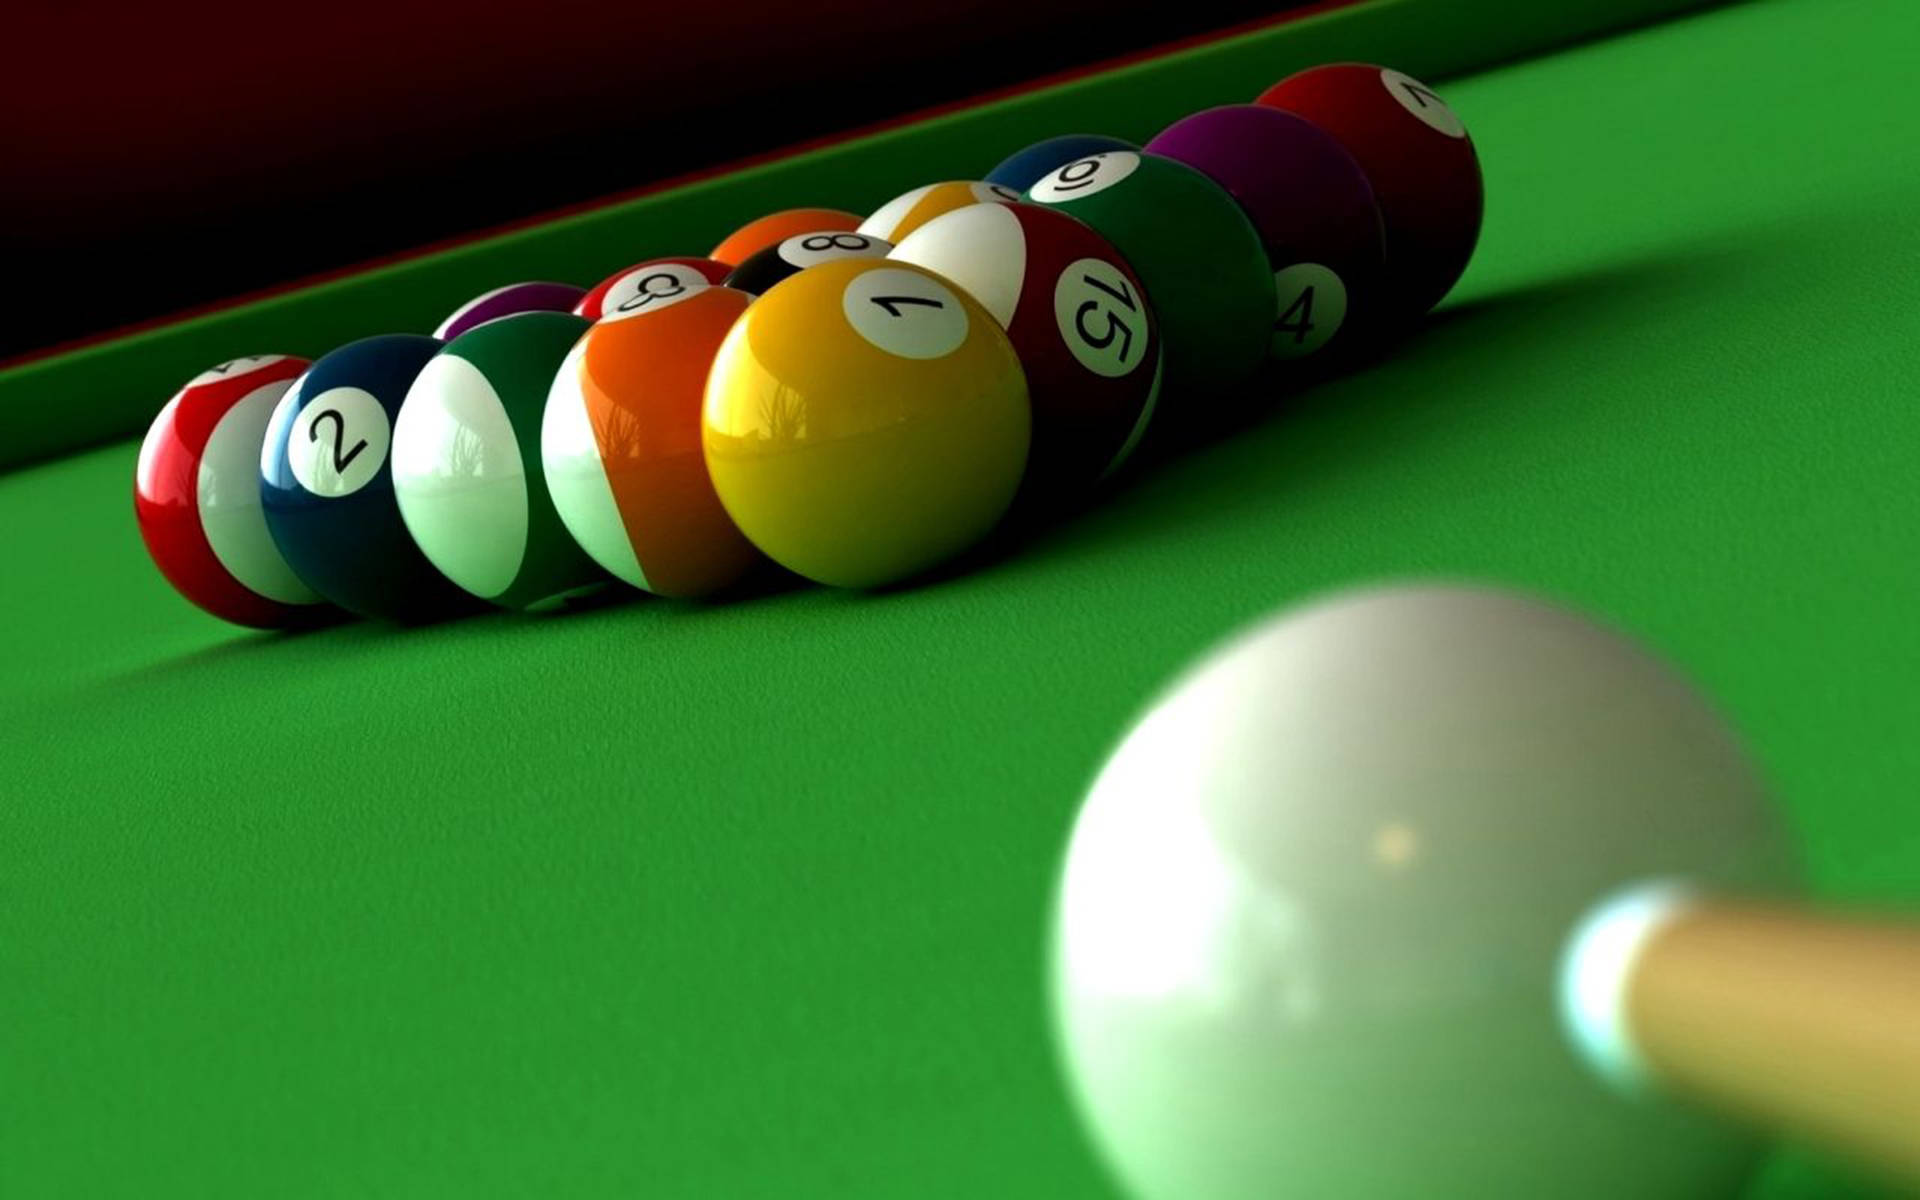 Perfect Precision - A Masterful Snooker Shot Background